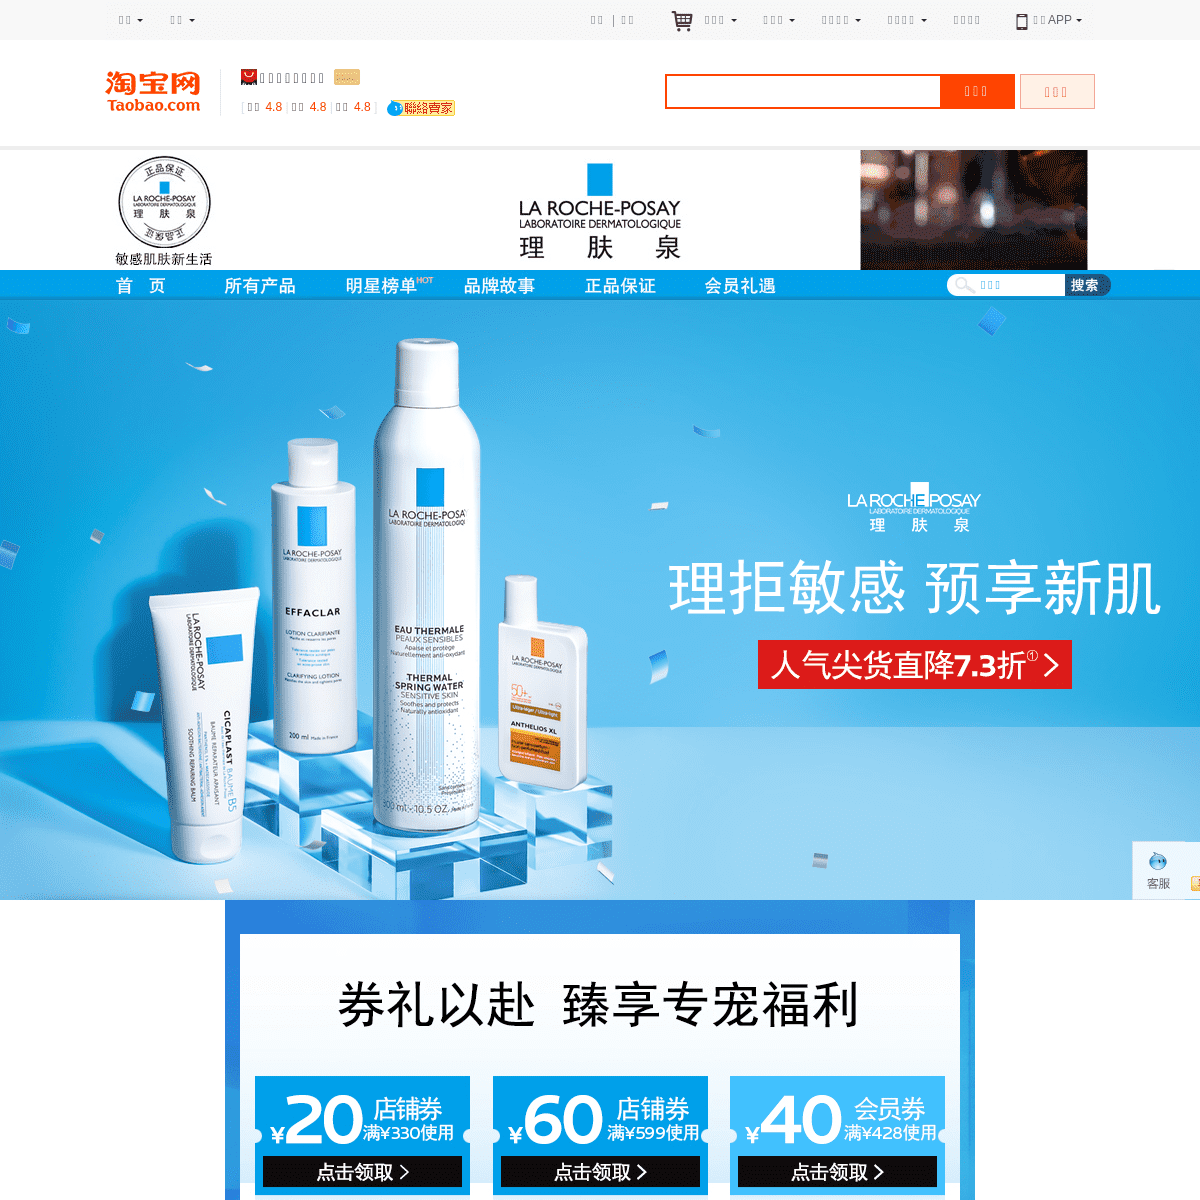 A complete backup of larocheposay.tmall.com